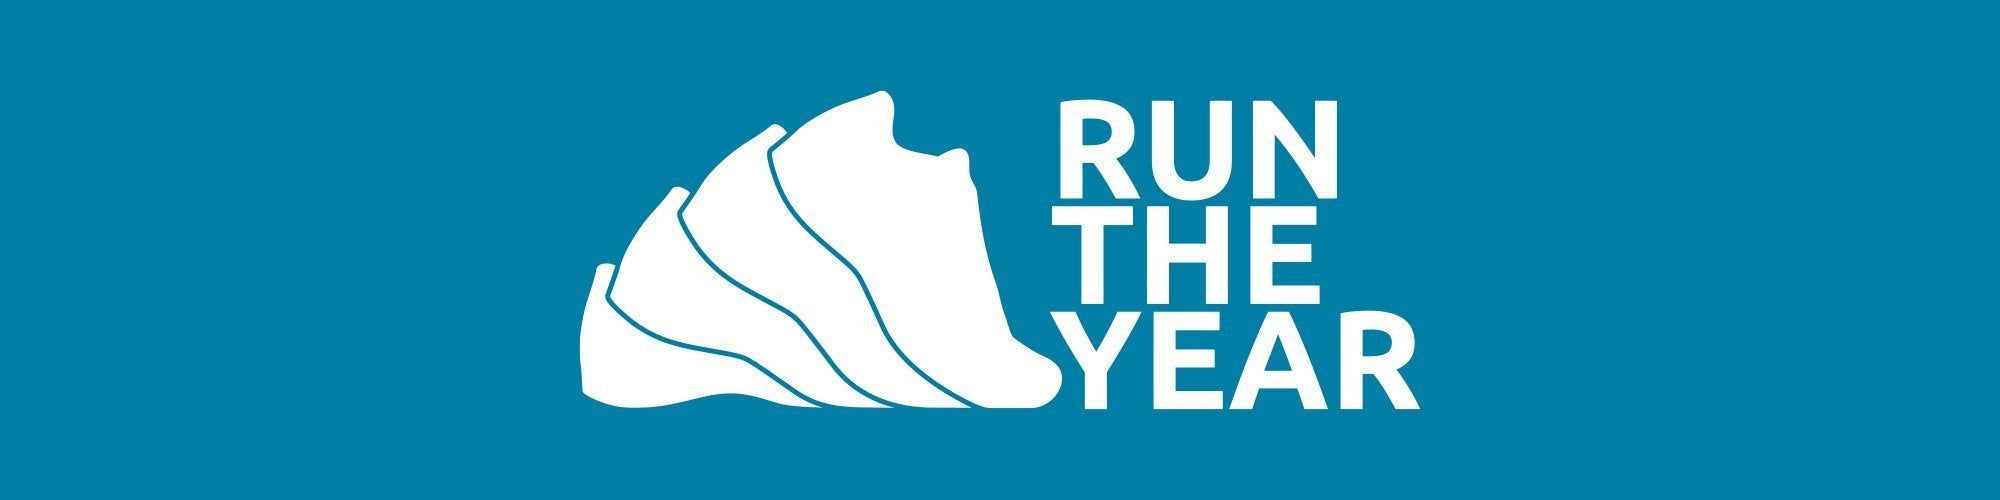 Run The Year Registrations - Virtual Fitness Challenge Collection | Run The Edge